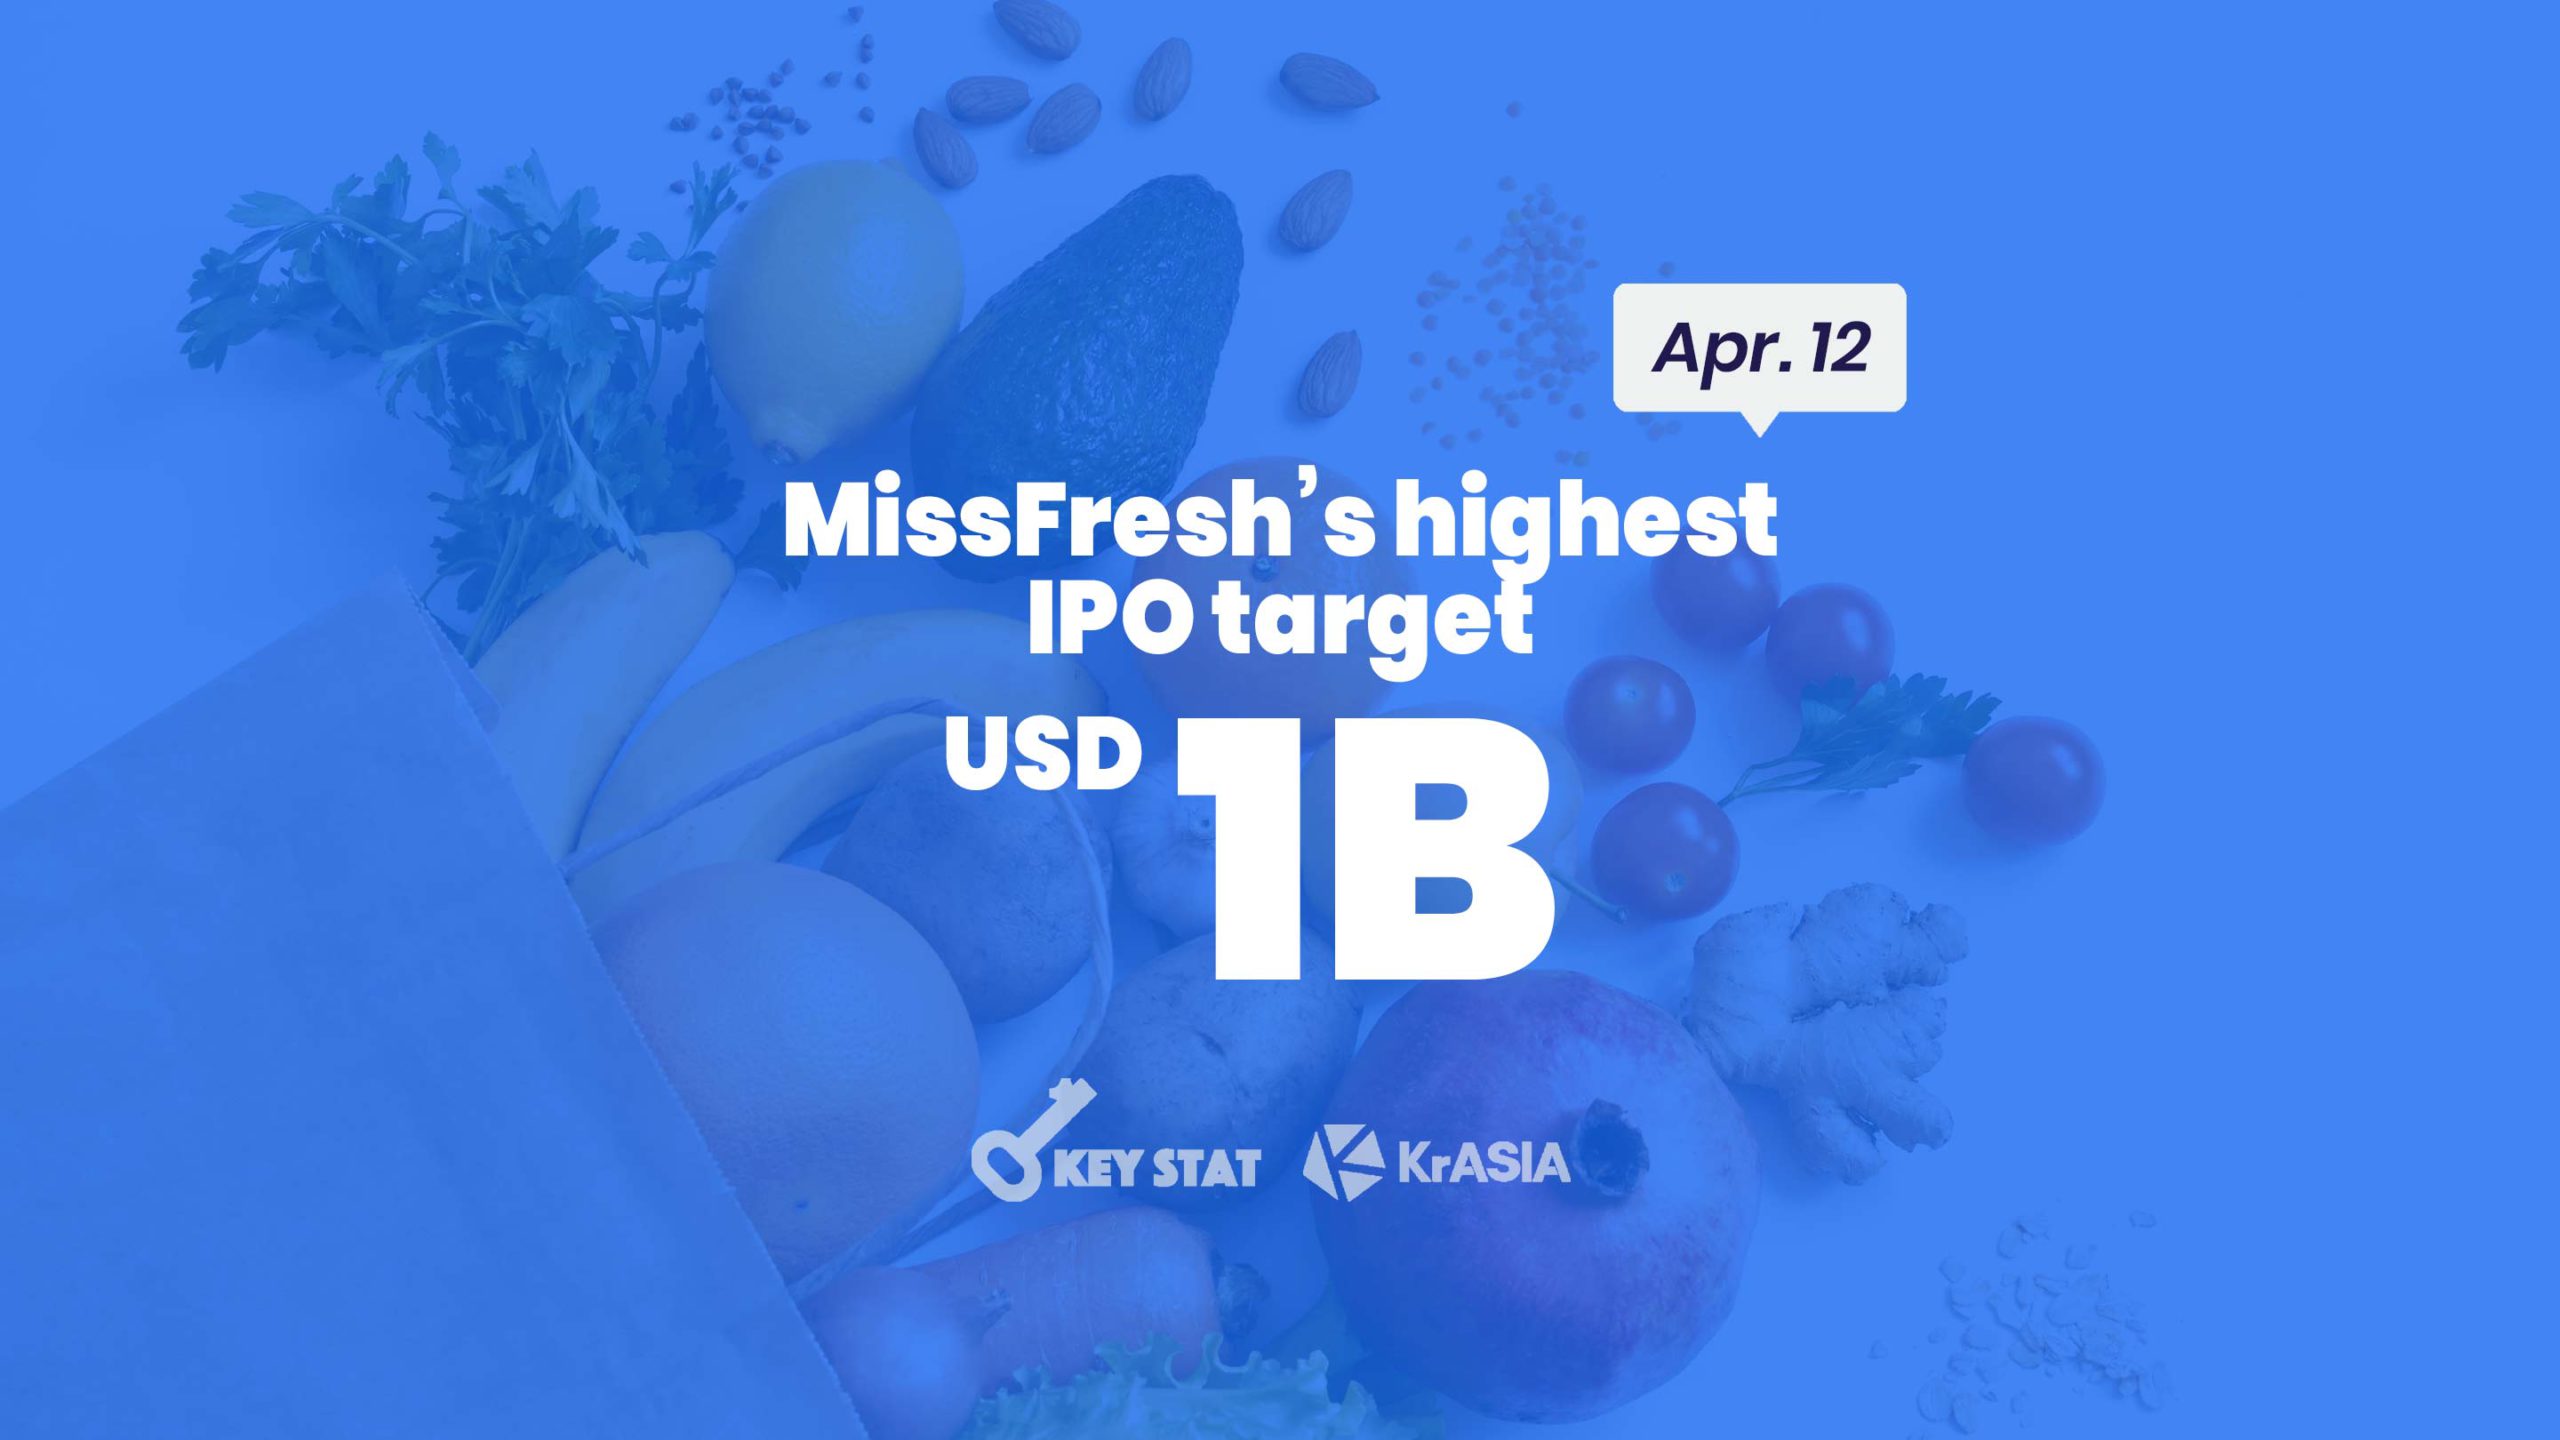 KEY STAT | Online grocer MissFresh privately files for IPO in the US